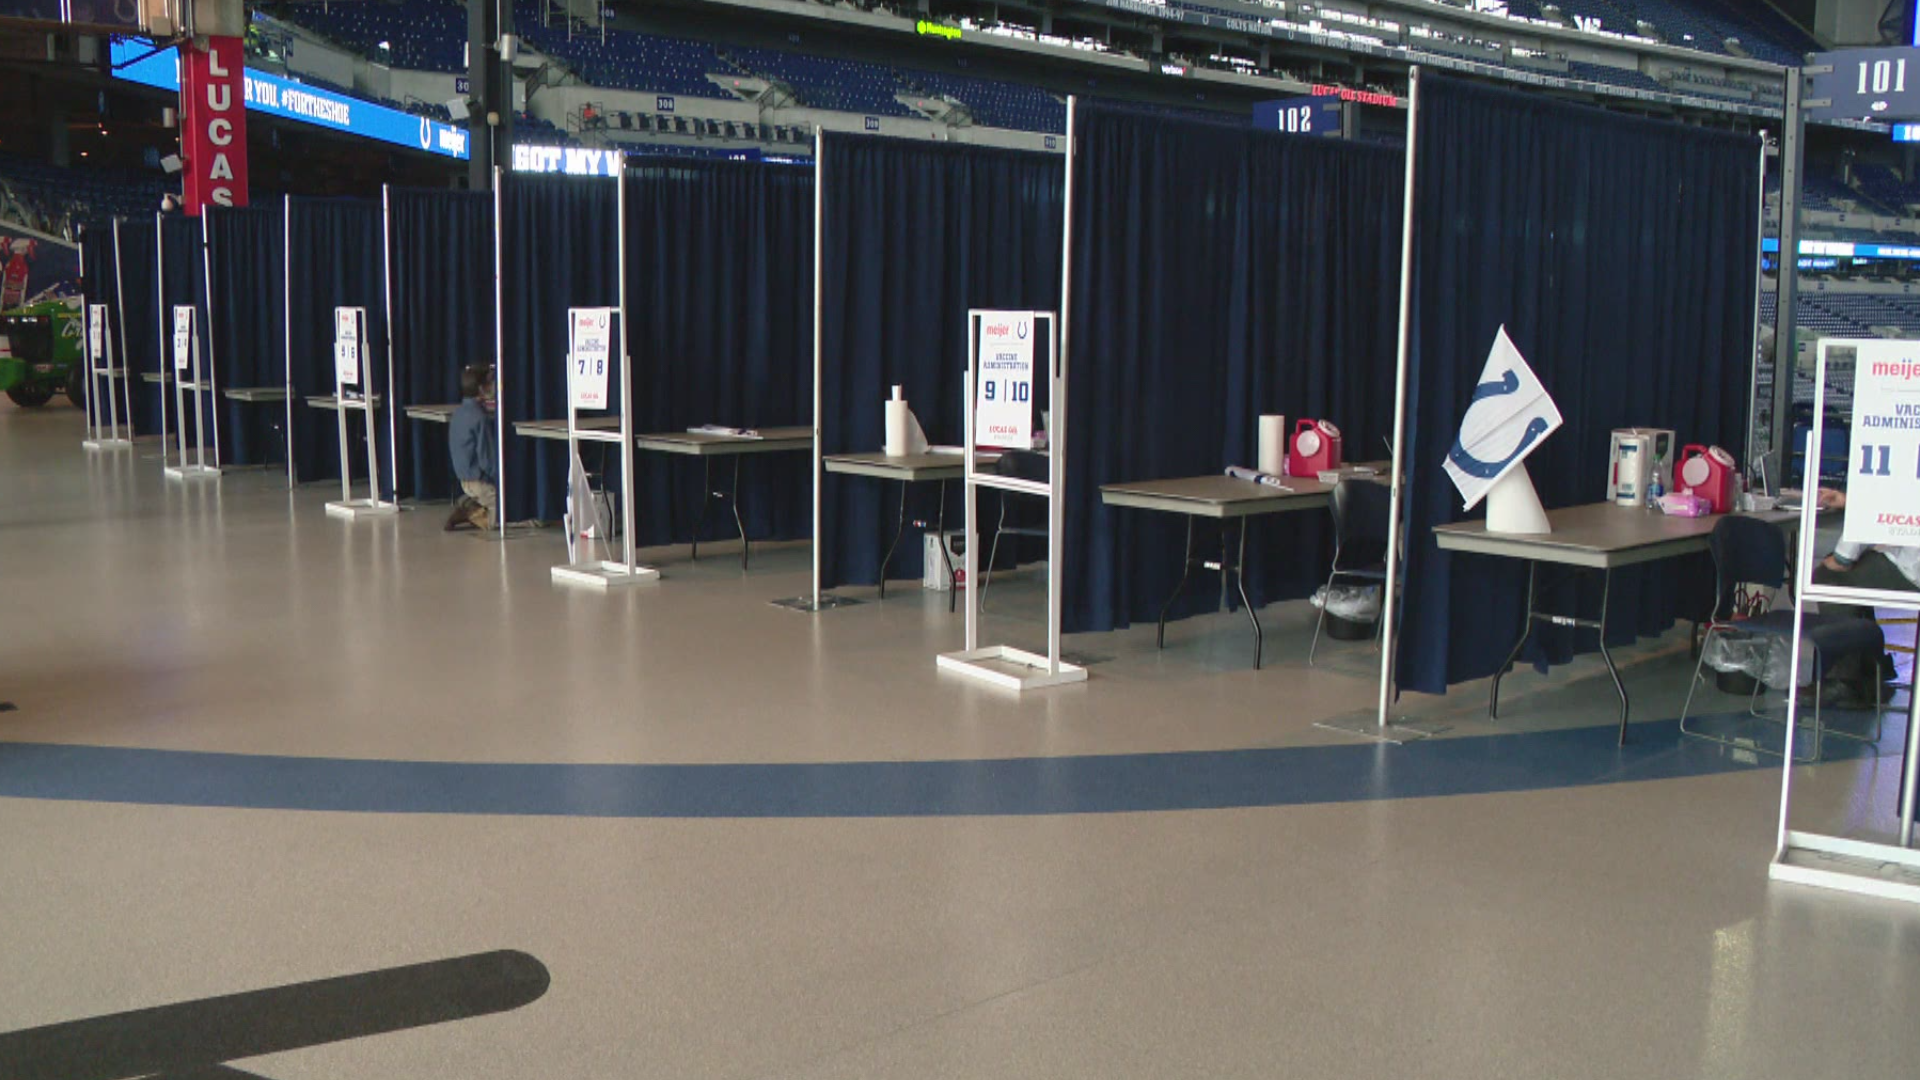 The vaccine clinic at Lucas Oil Stadium wasn't busy Friday.